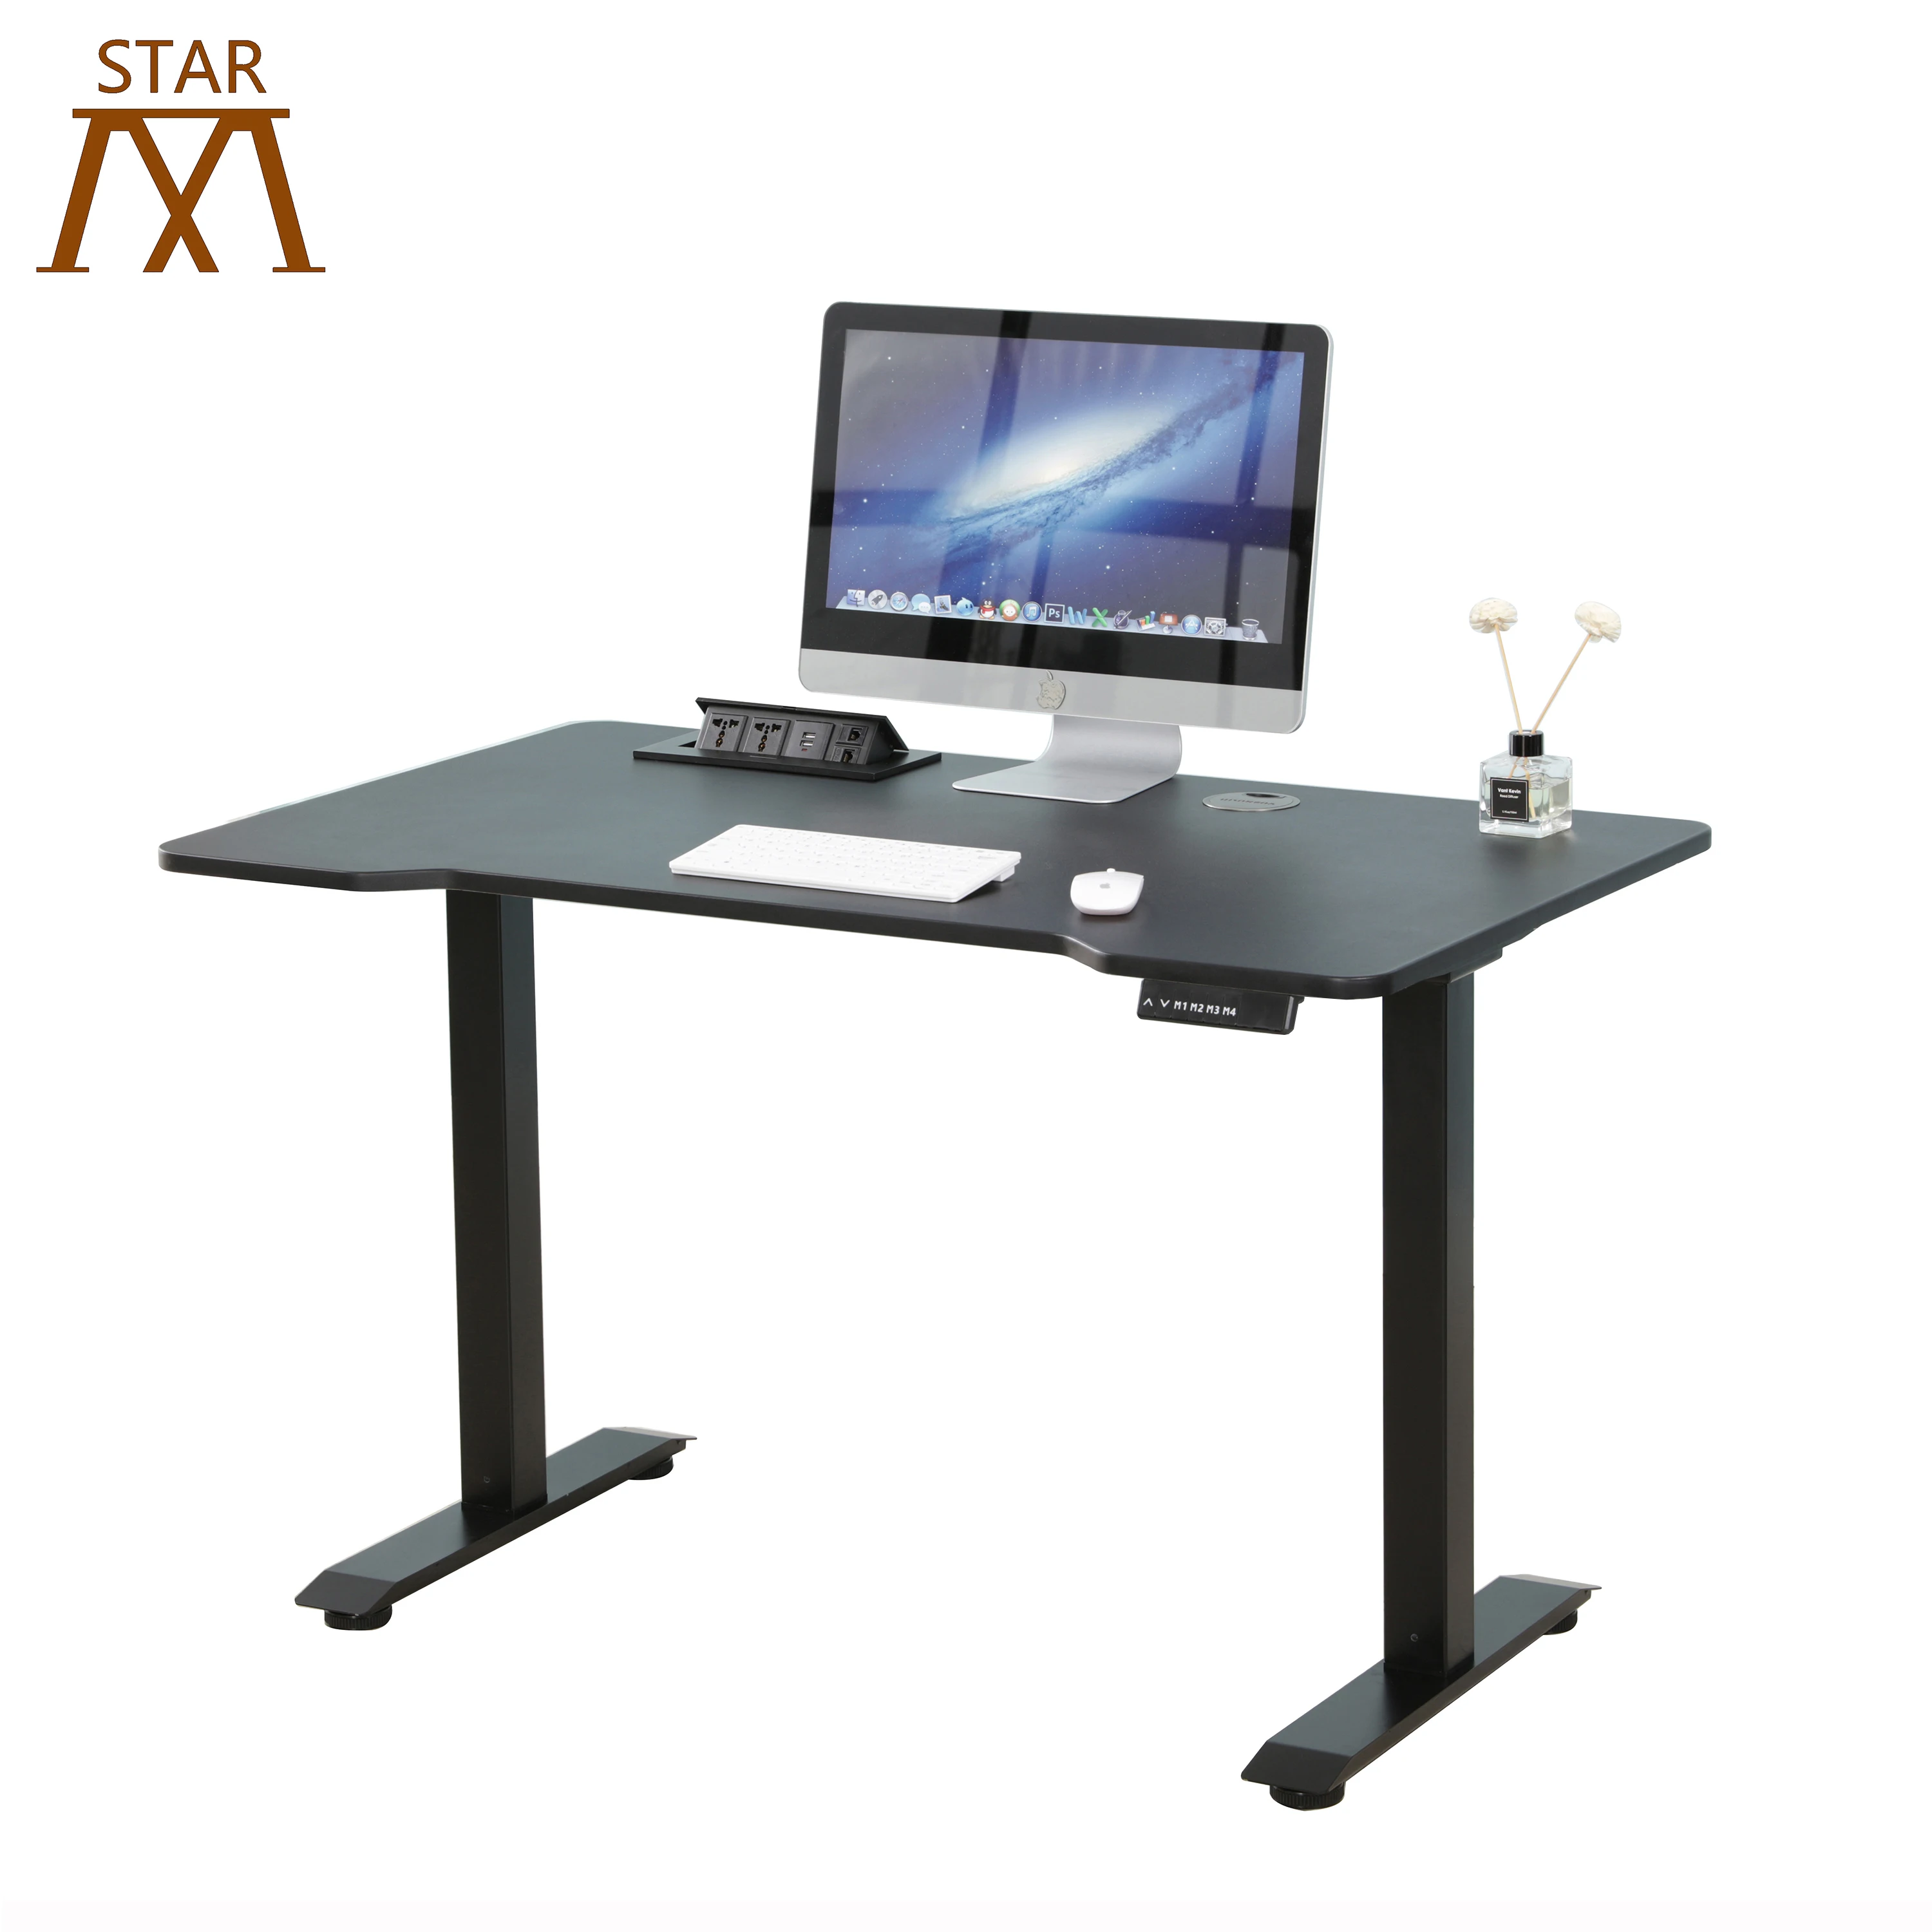 

Mstar Leisure Table Student Desk Height Adjustable Sit Stand Table motor Lifted Movable Office Standing Desk